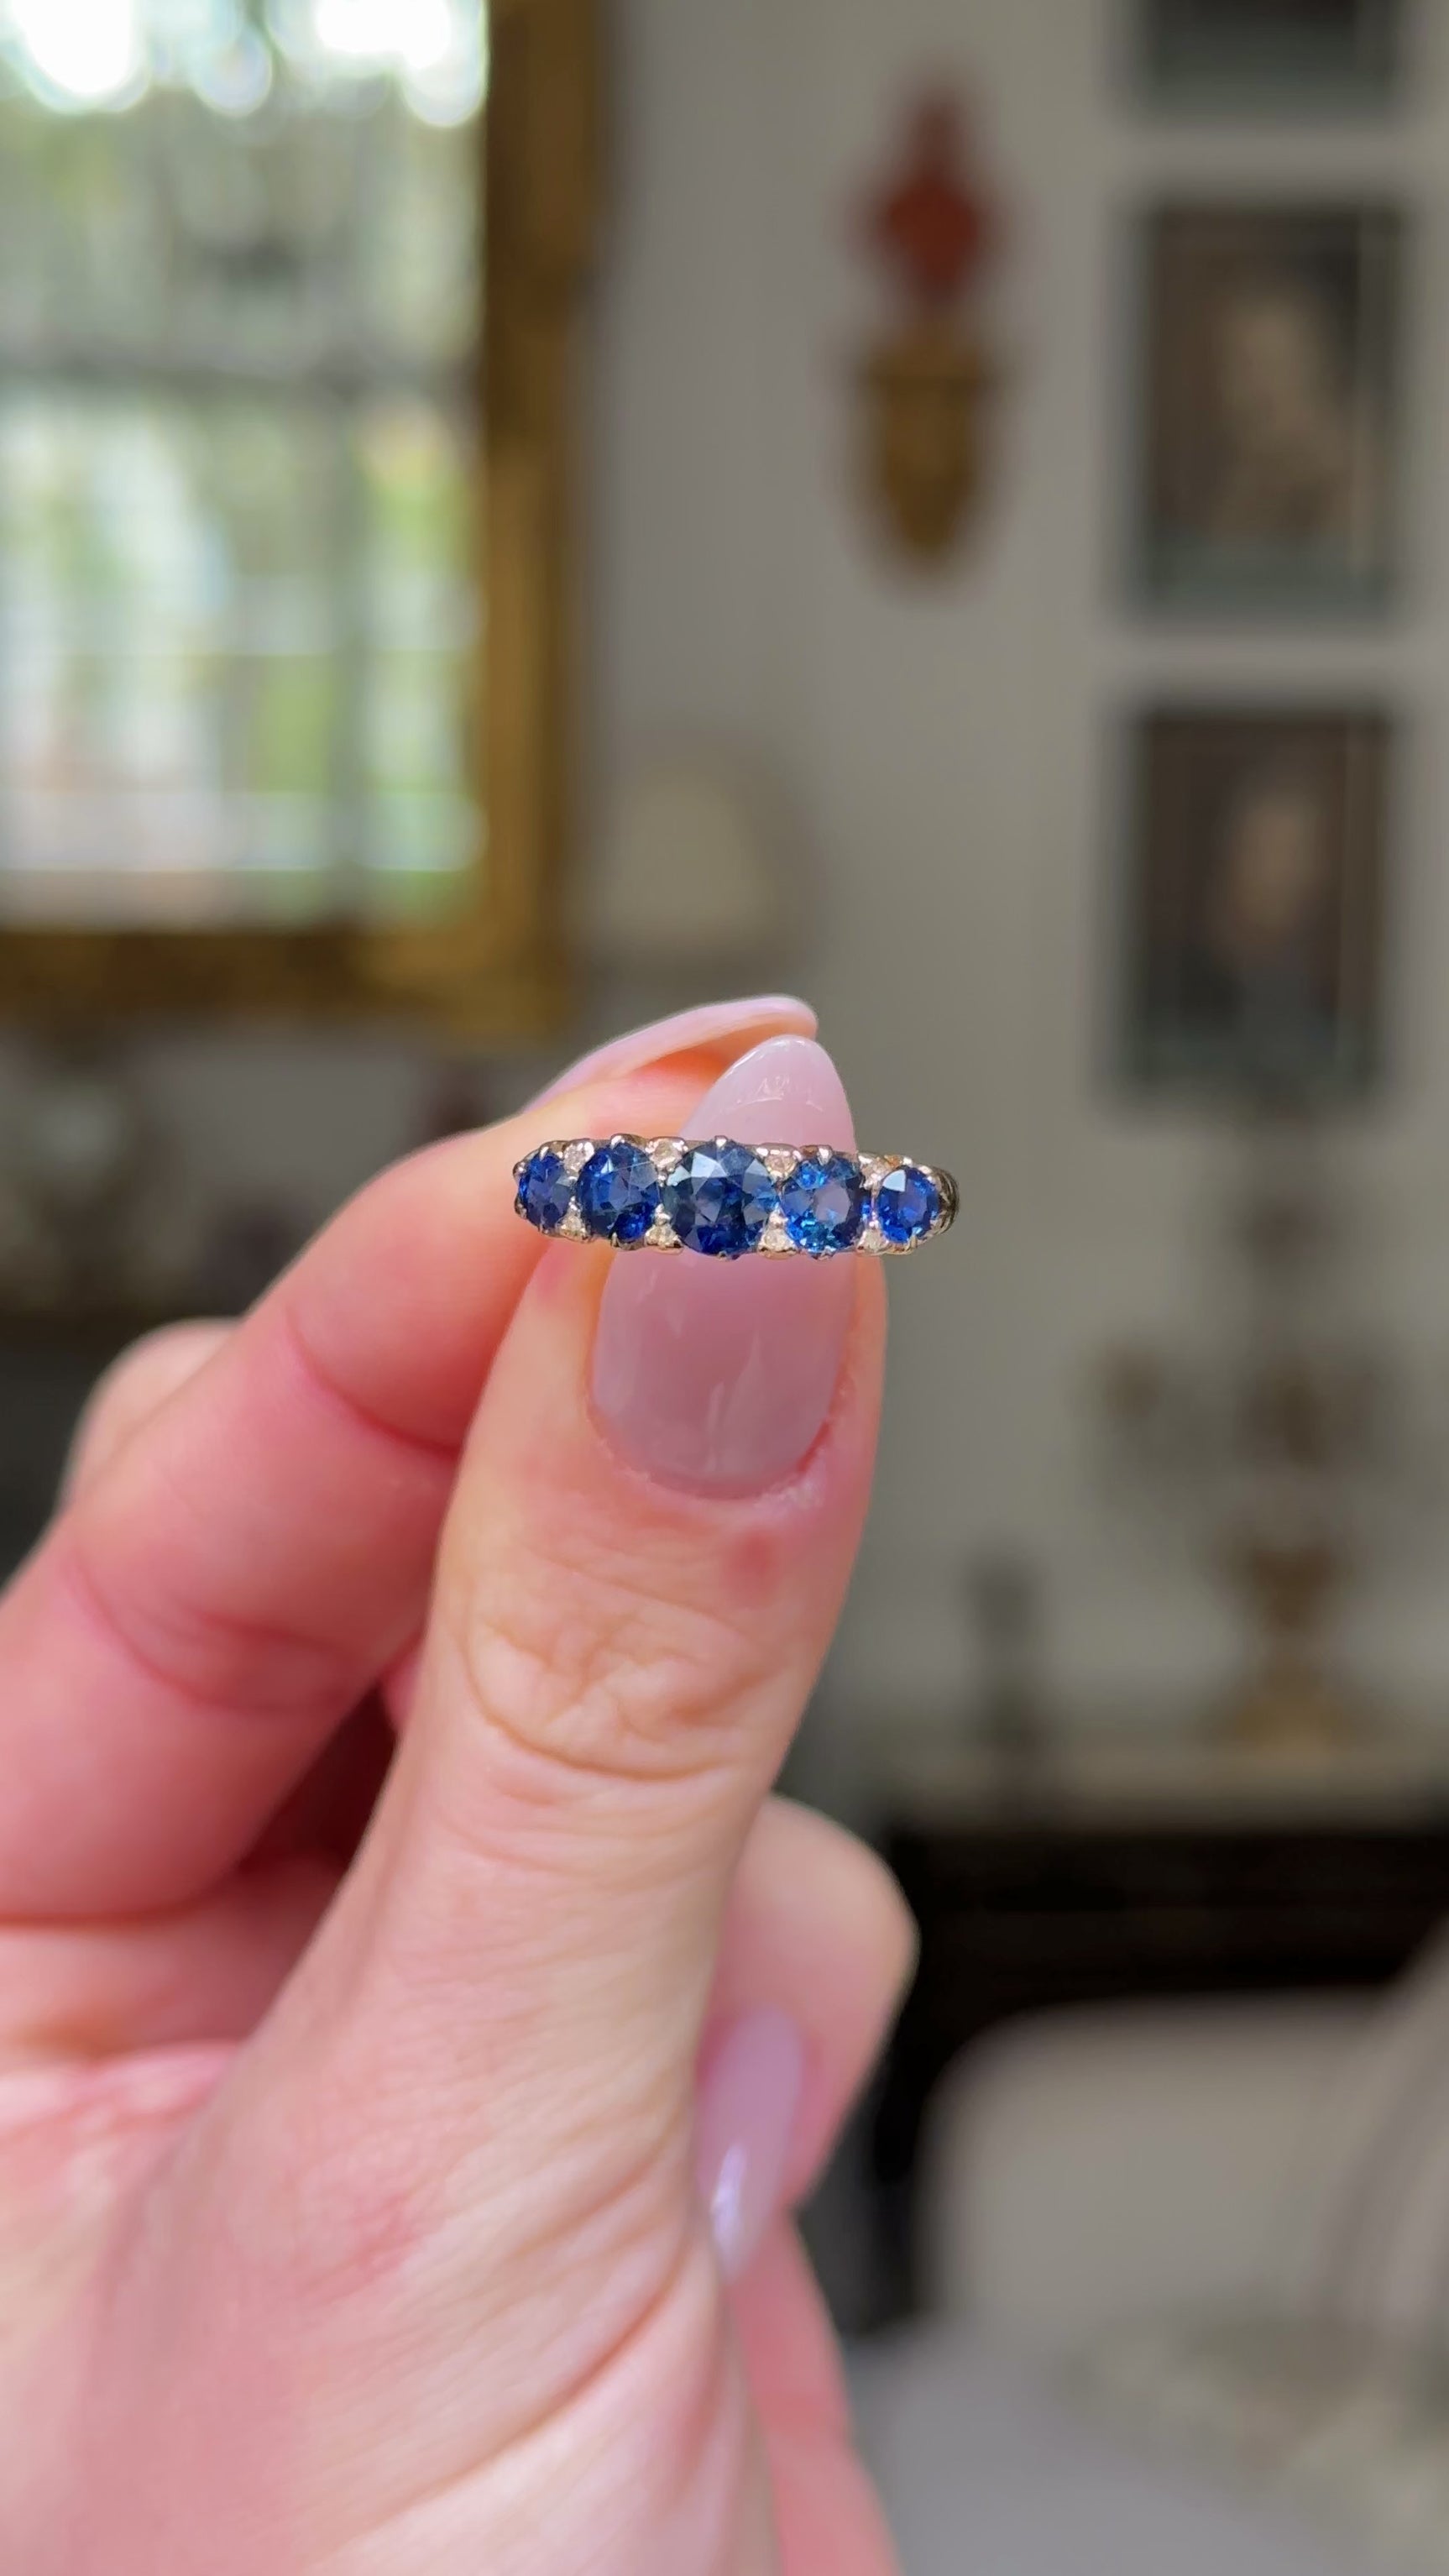 sapphire and diamond five stone ring held in fingers and rotated to give perspective.